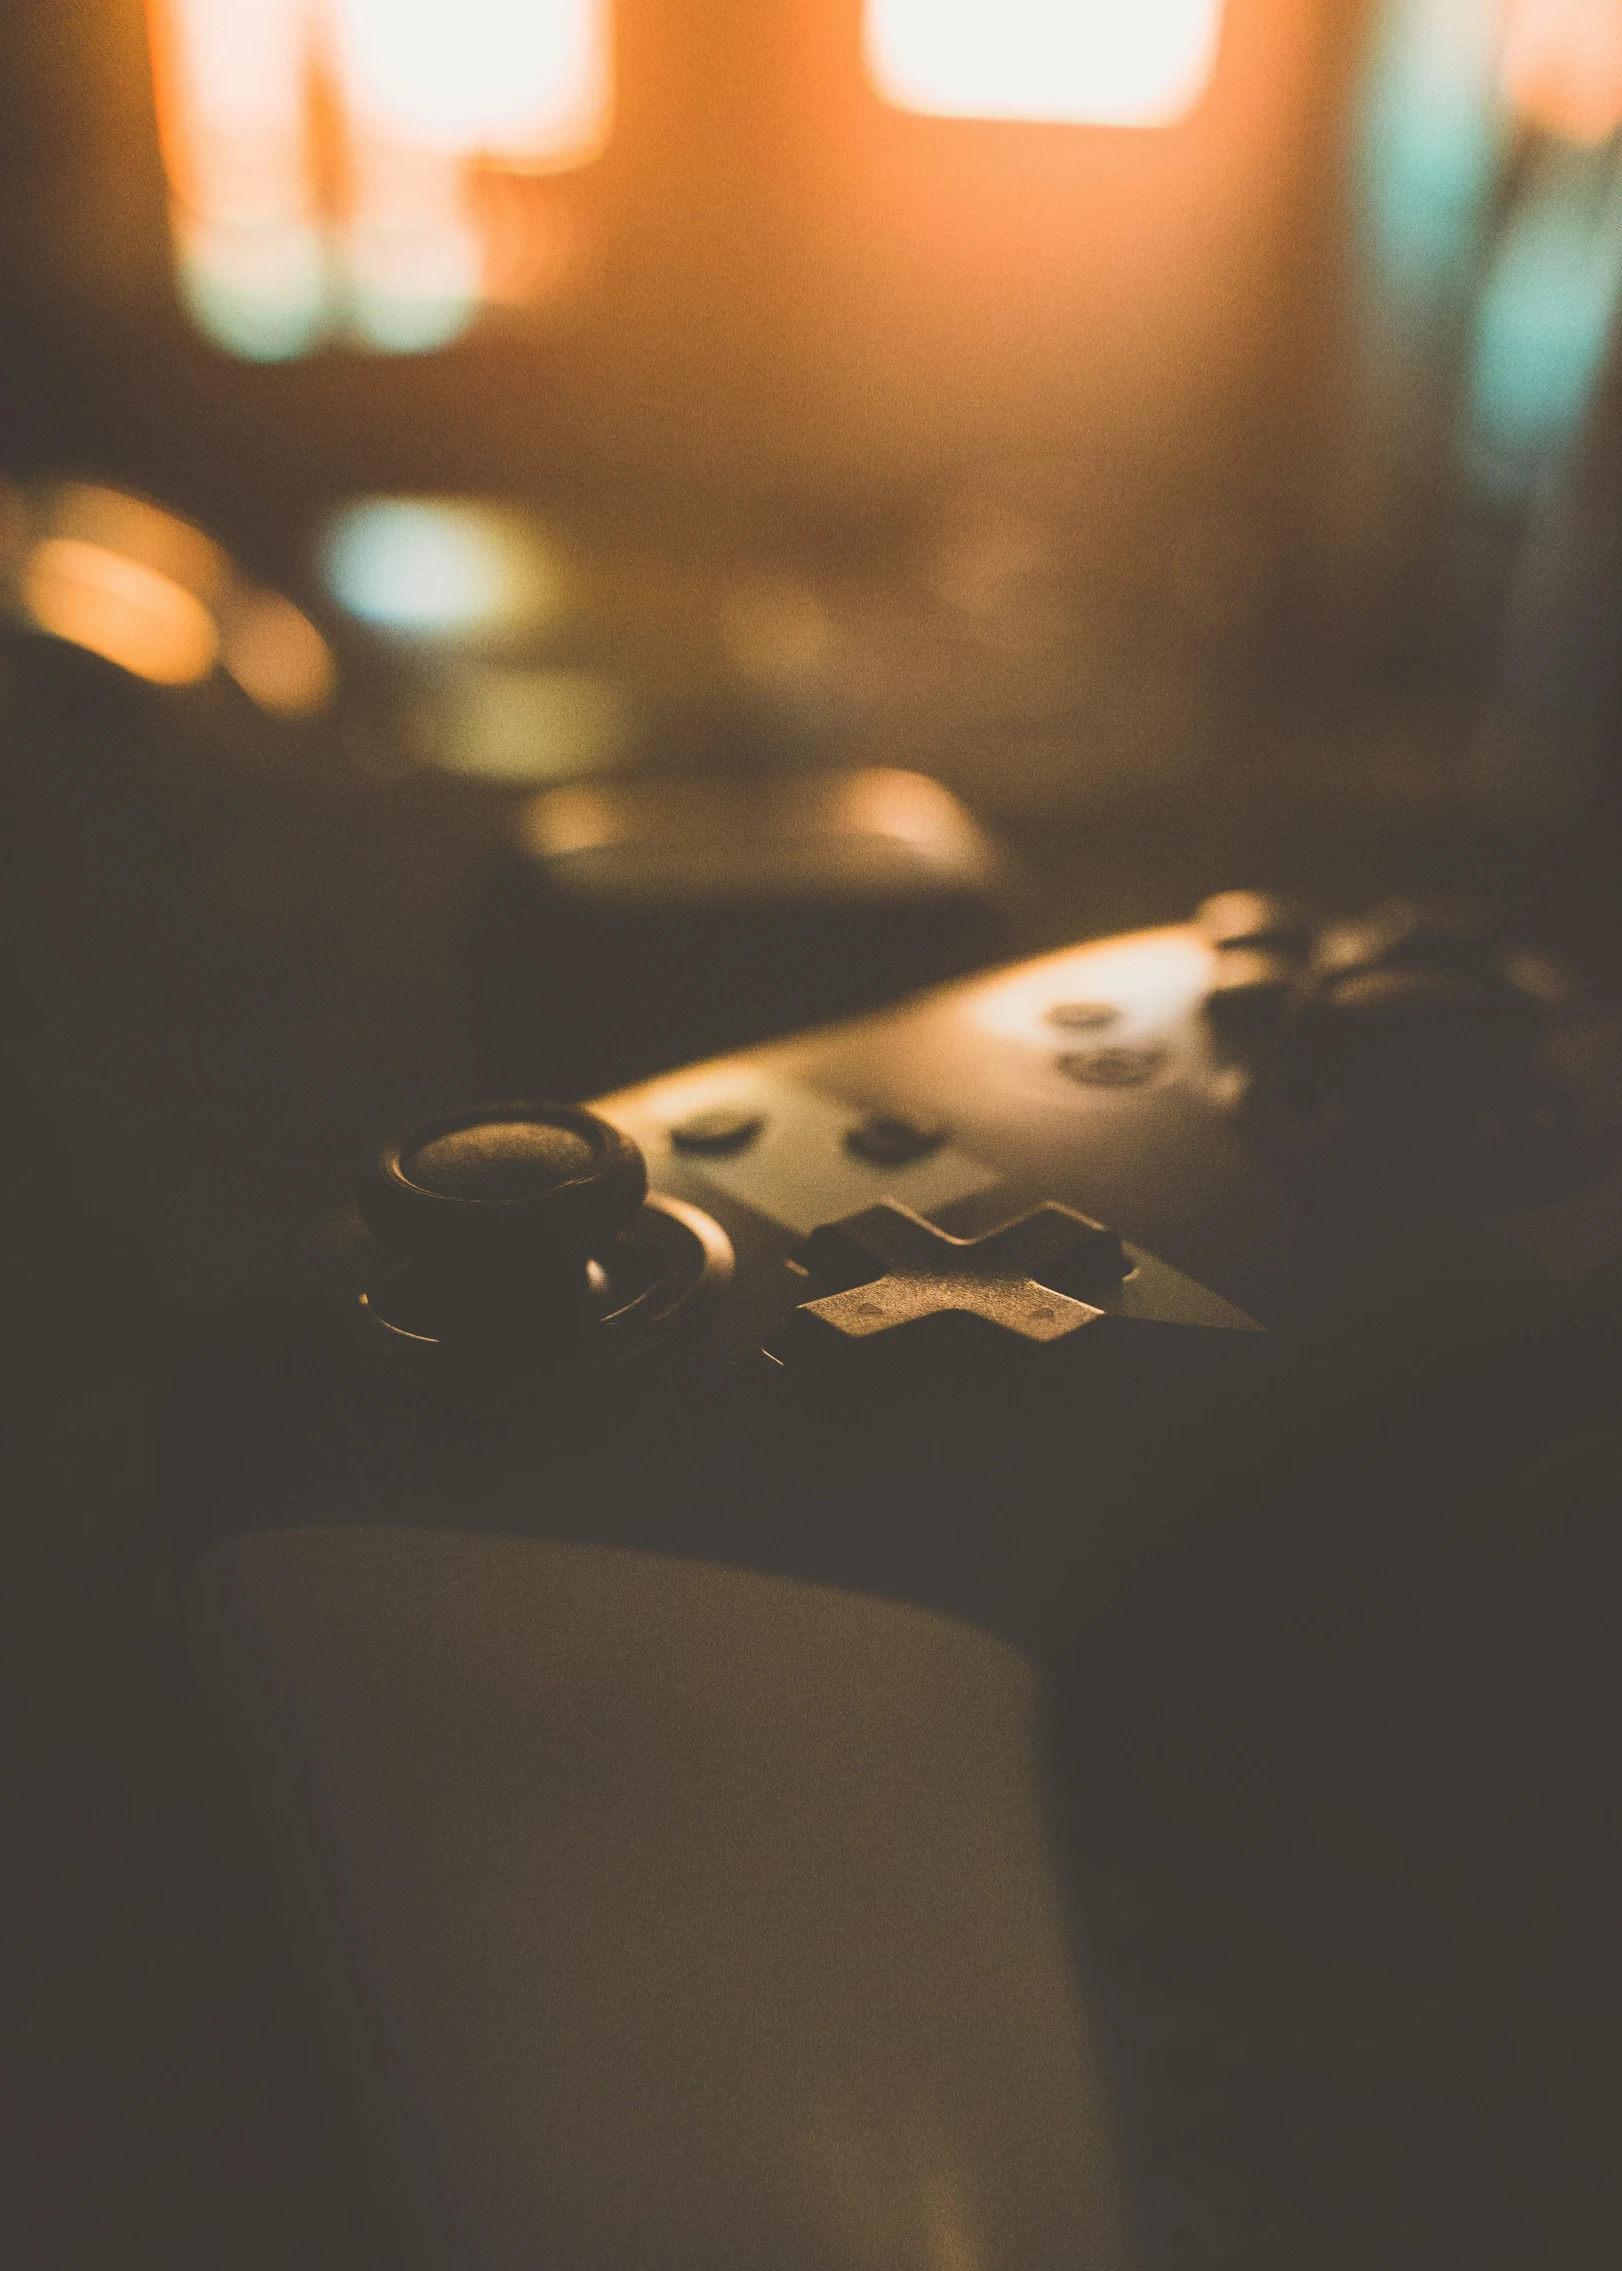 blurry picture of a remote and controller